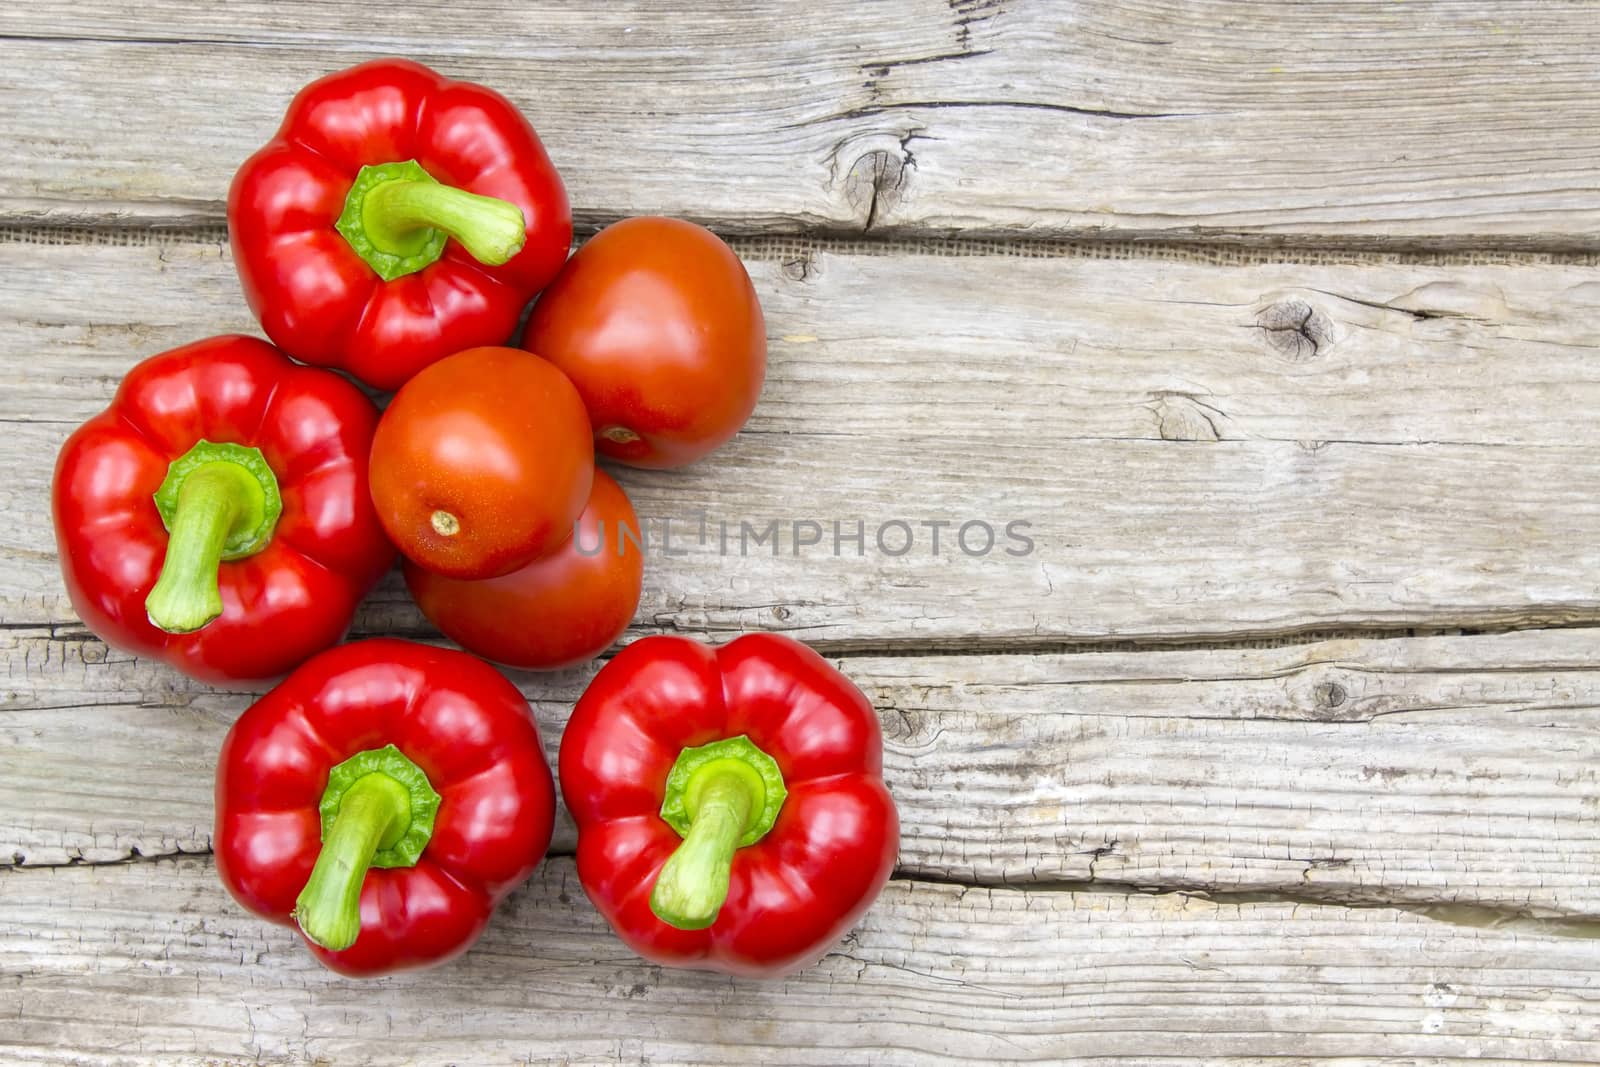 tomatoes and peppers on wooden background by miradrozdowski